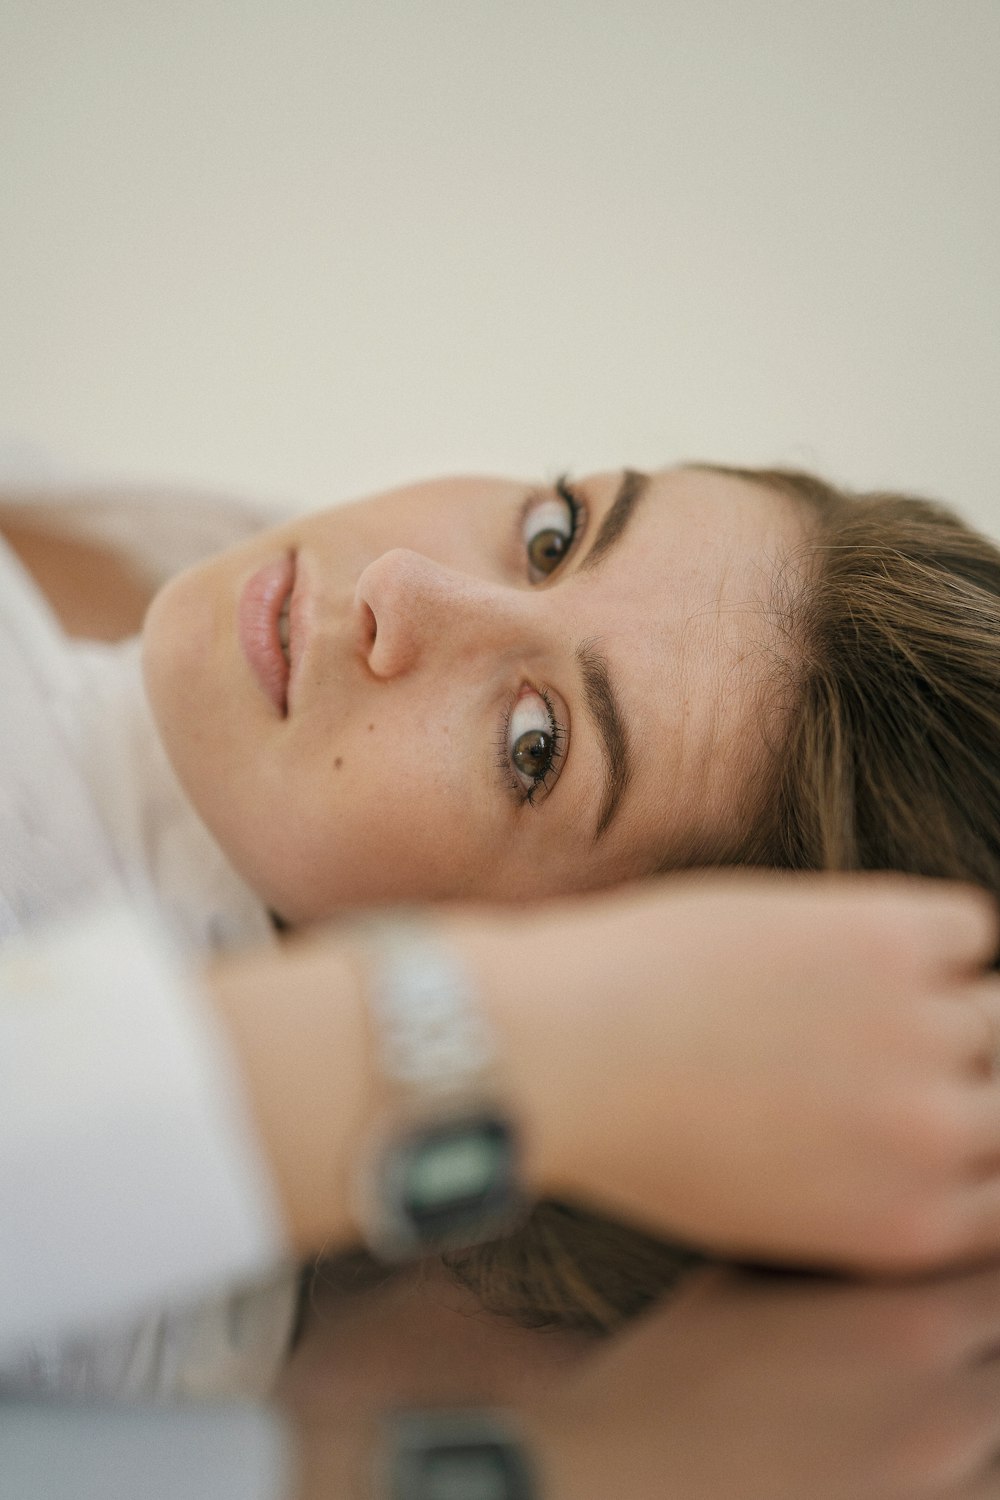 a woman laying on a table with a watch on her arm